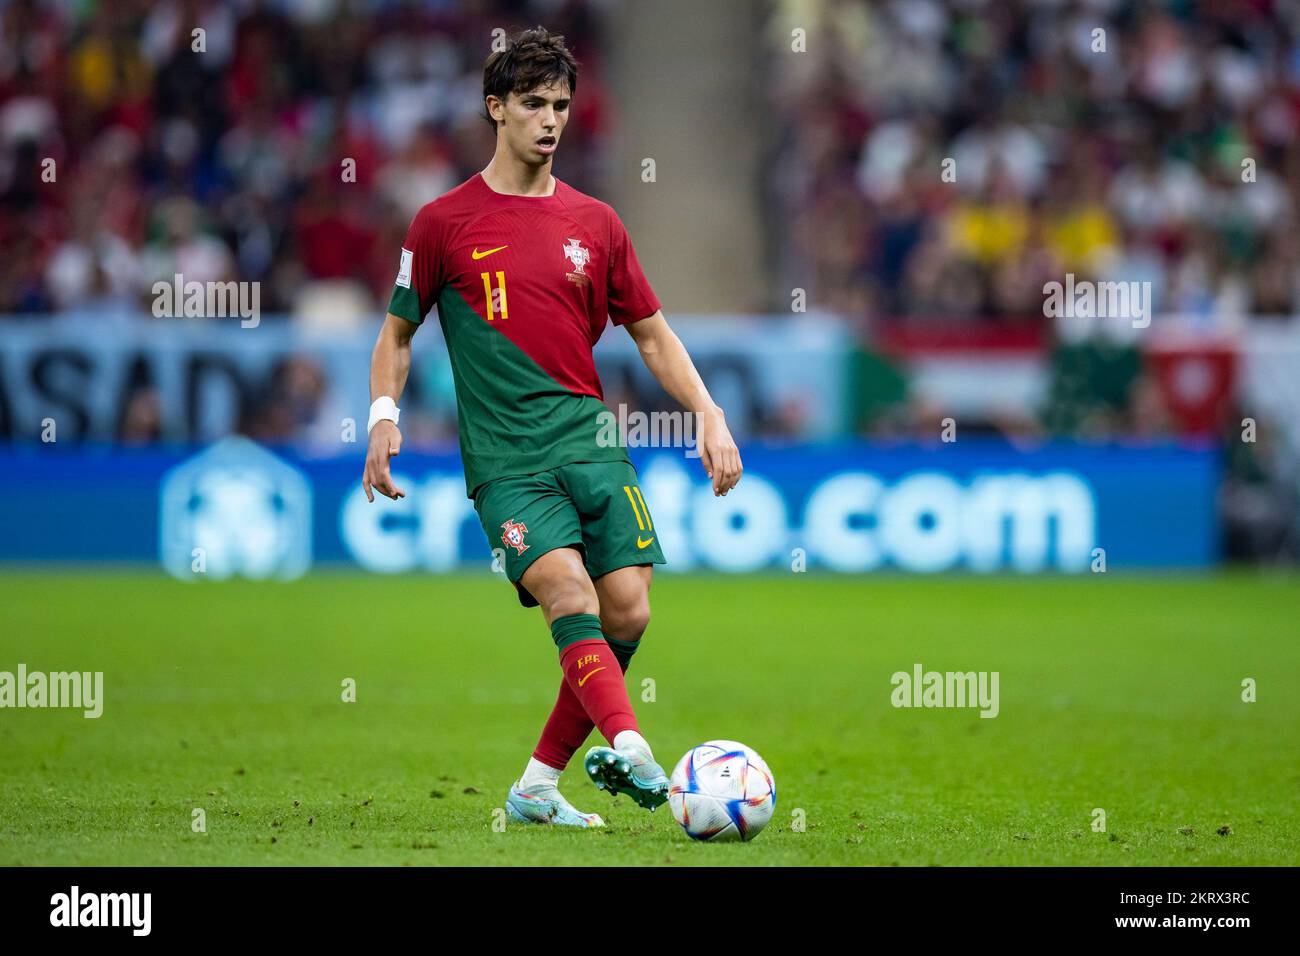 Lusail, Qatar. 28th Nov, 2022. Soccer: World Cup, Portugal - Uruguay, Preliminary round, Group H, Matchday 2, Lusail Iconic Stadium, Portugal's Joao Félix in action. Credit: Tom Weller/dpa/Alamy Live News Stock Photo